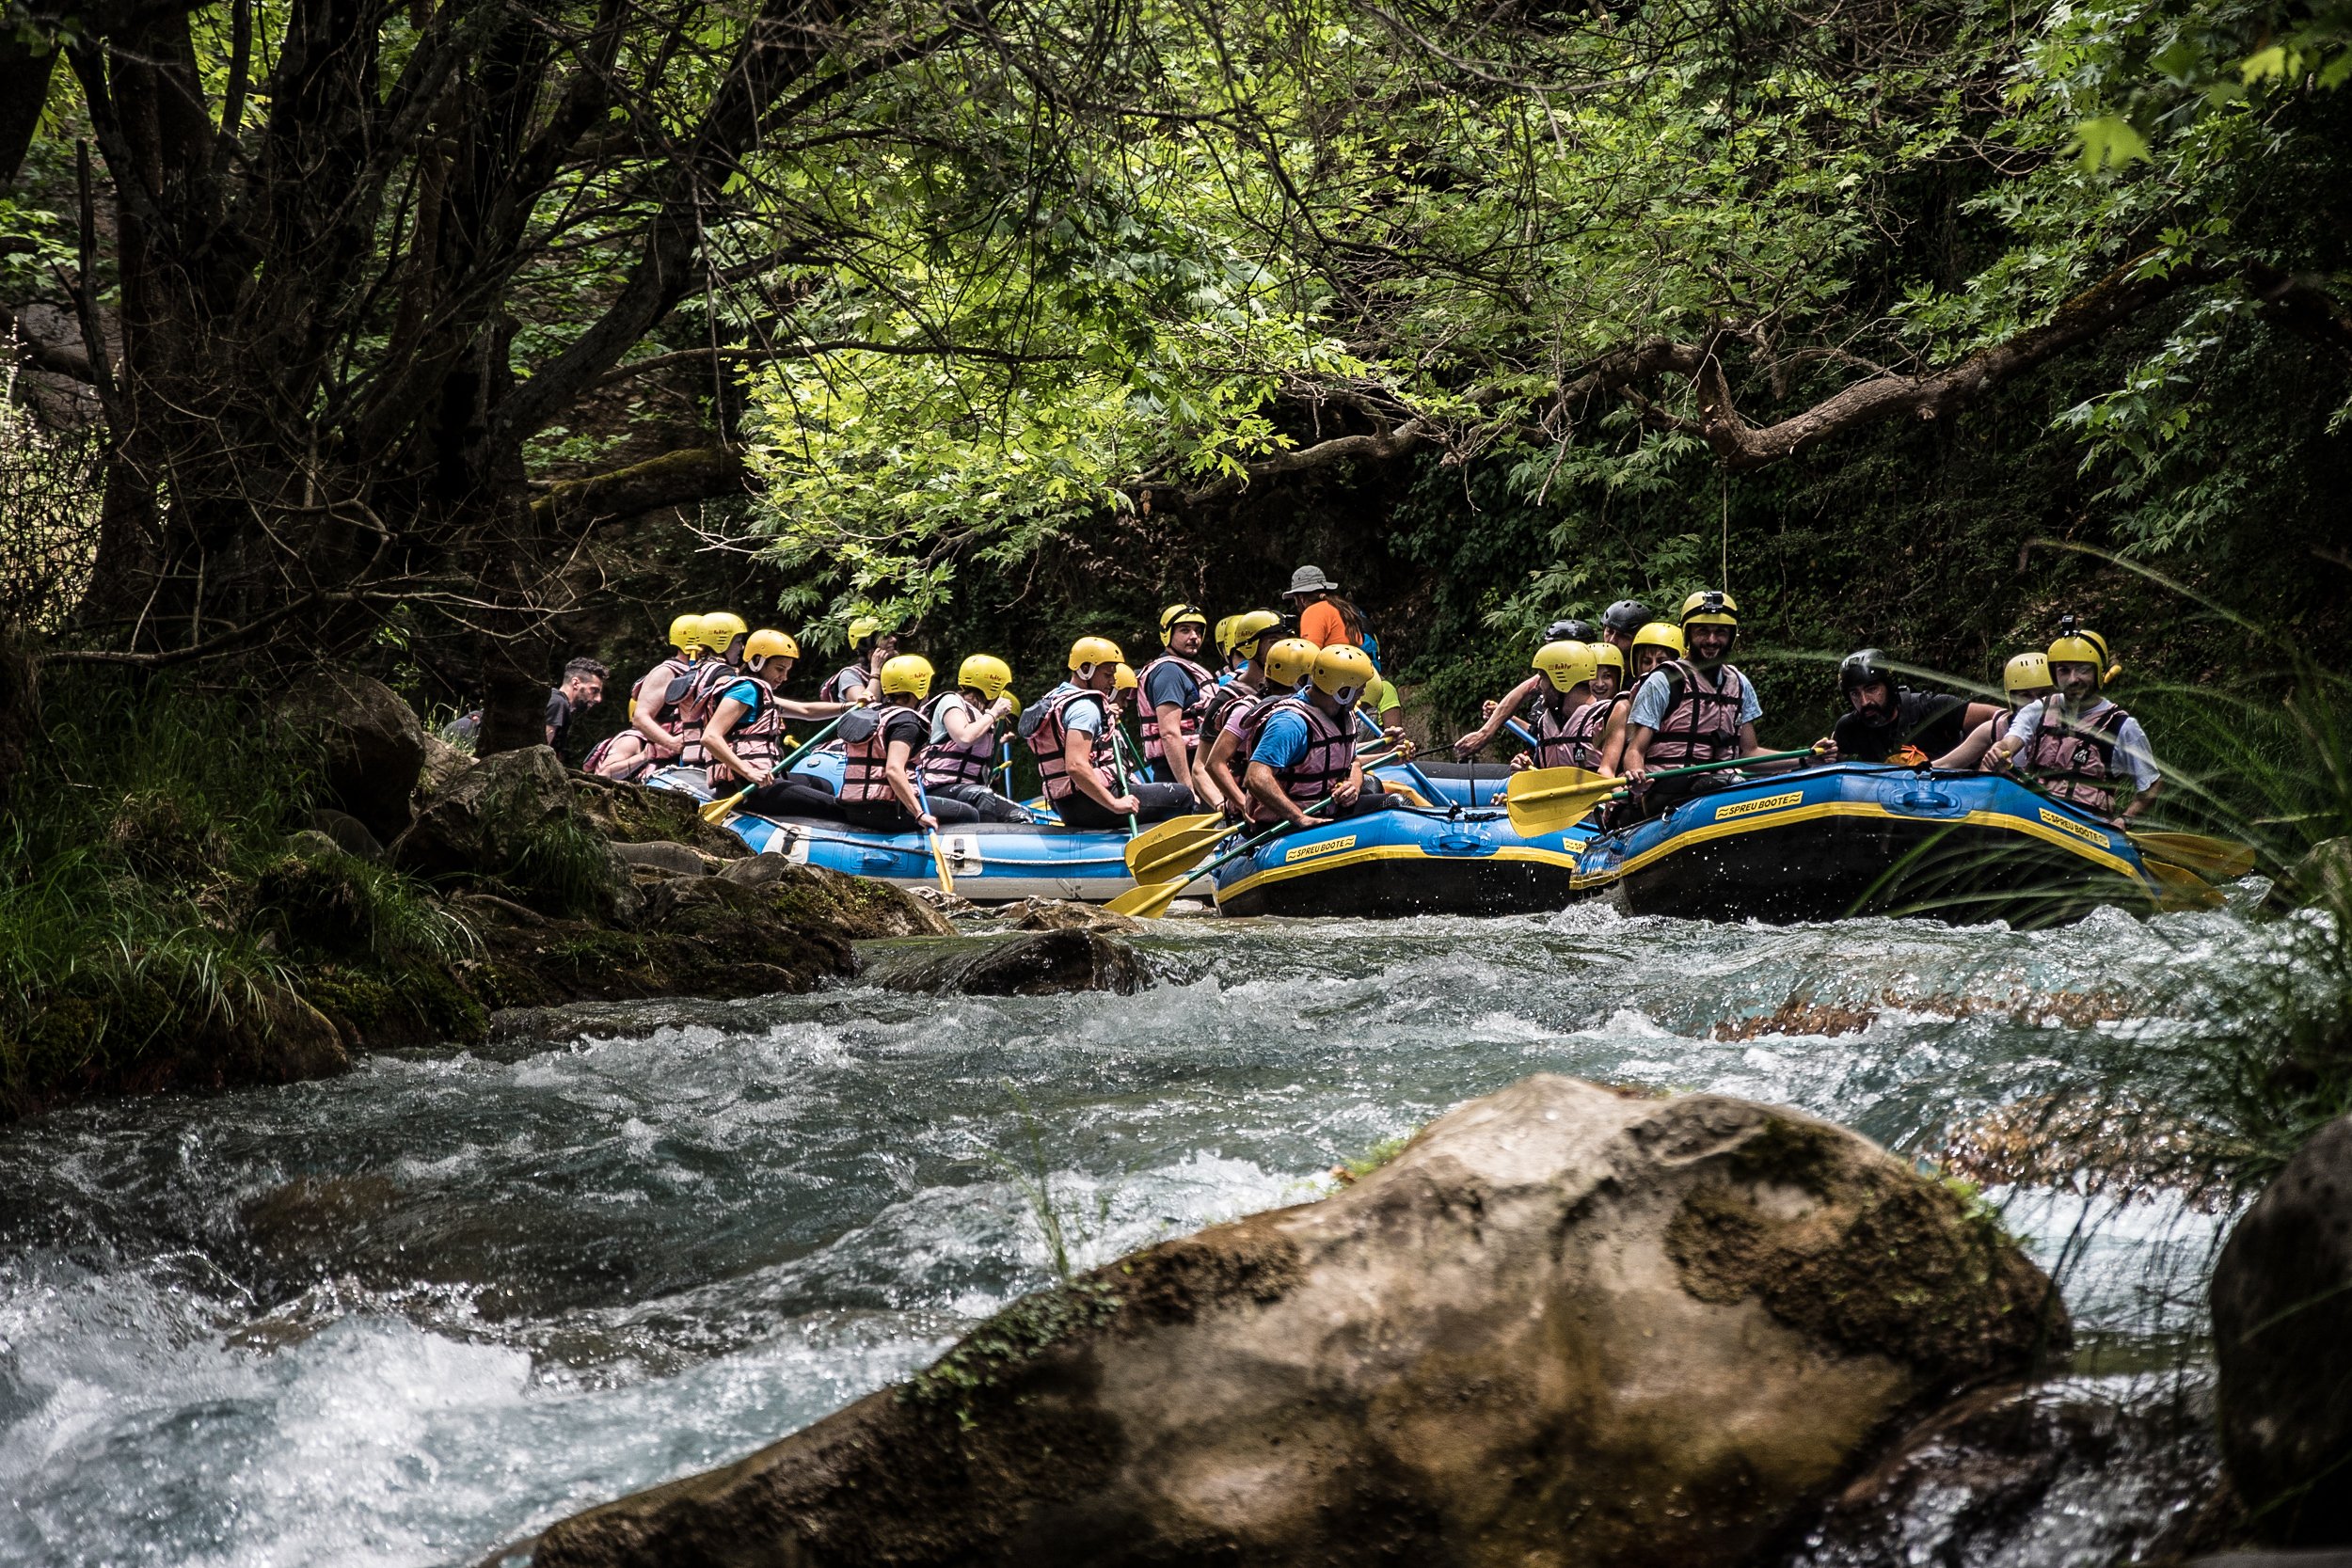 Join Us For A Rafting Adventure On The Peloponnese Rafting & Hiking Experience From Athens_70